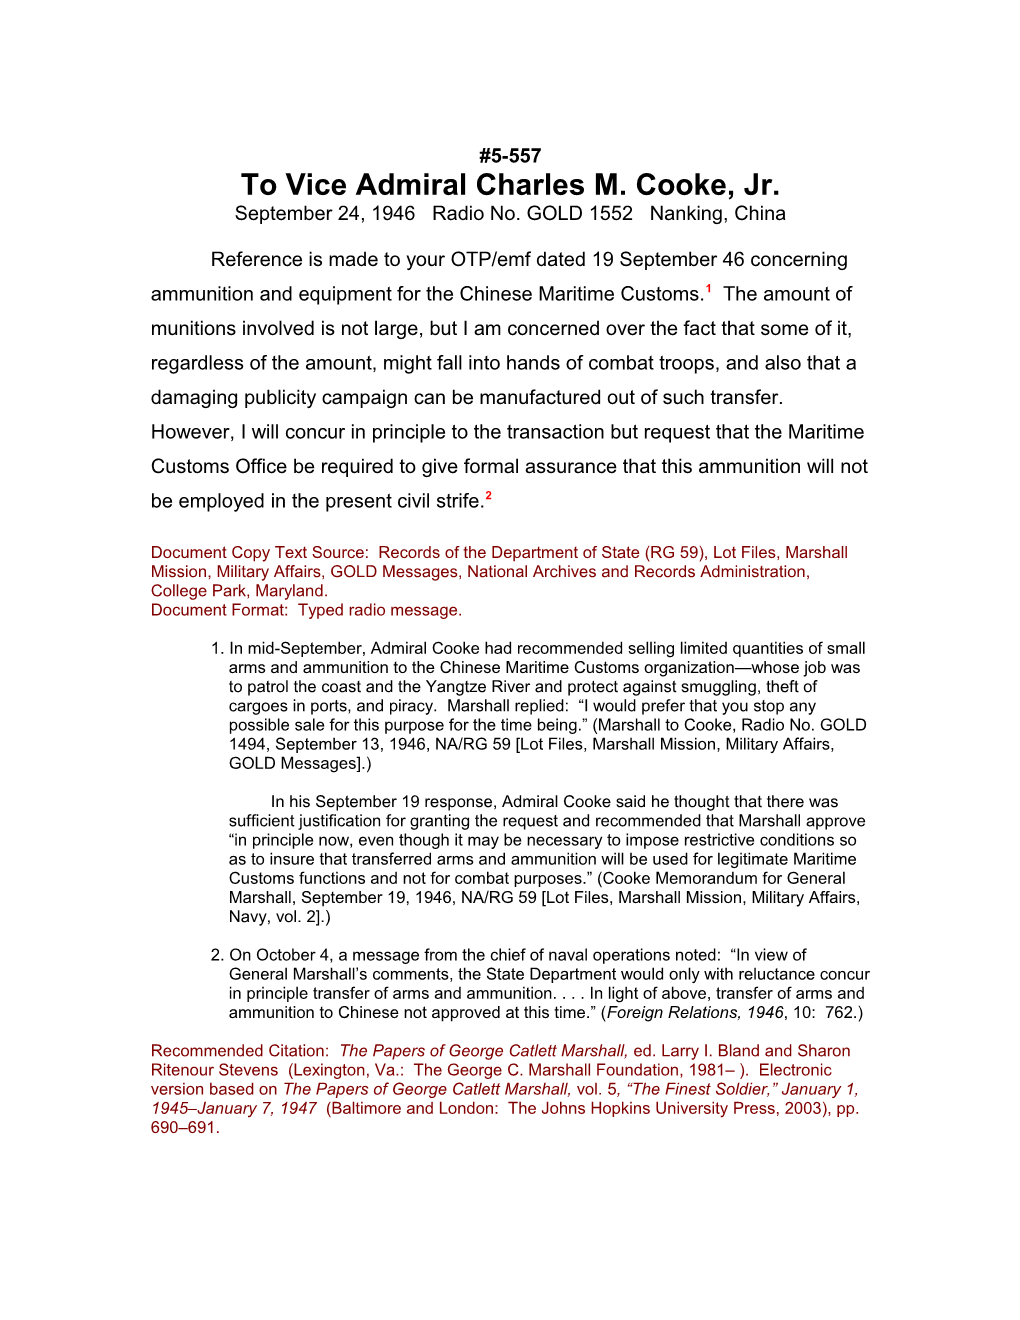 To Vice Admiral Charles M. Cooke, Jr